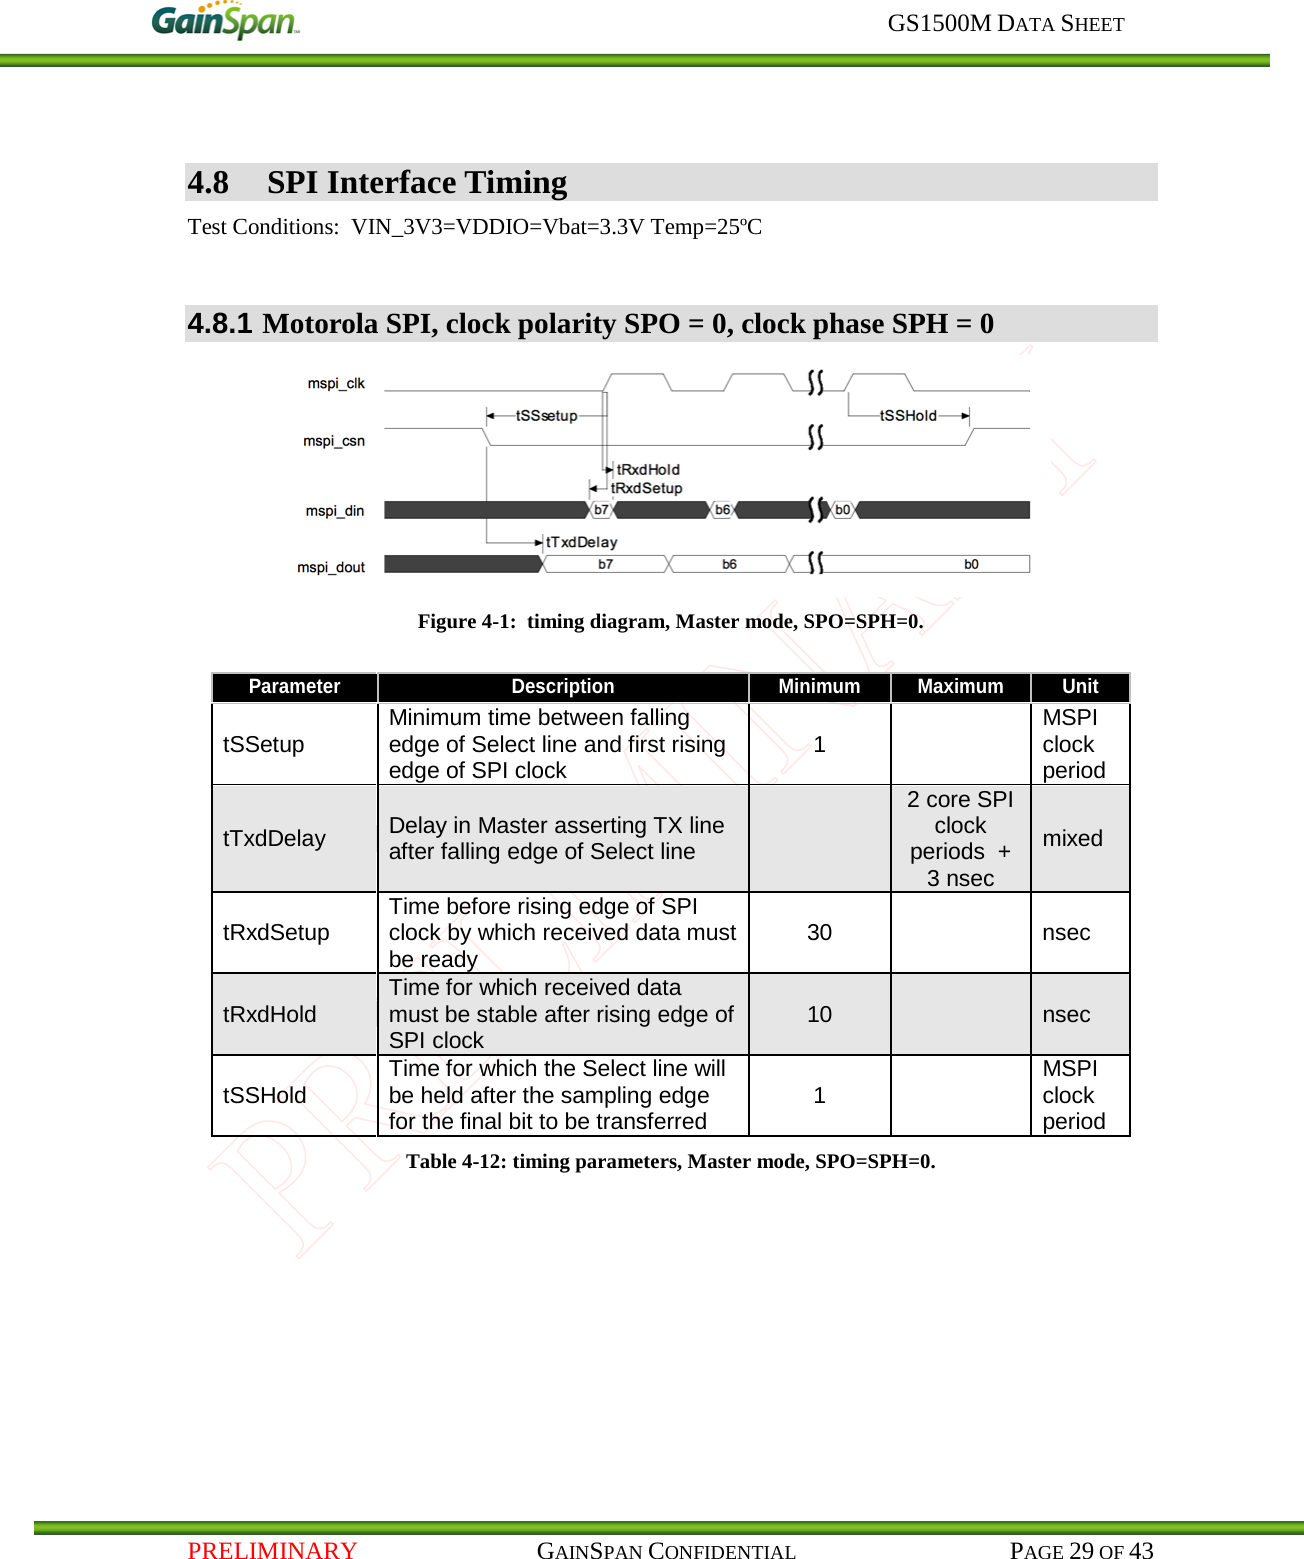     GS1500M DATA SHEET   PRELIMINARY                                    GAINSPAN CONFIDENTIAL                                           PAGE 29 OF 43  4.8 SPI Interface Timing Test Conditions:  VIN_3V3=VDDIO=Vbat=3.3V Temp=25ºC  4.8.1 Motorola SPI, clock polarity SPO = 0, clock phase SPH = 0  Figure 4-1:  timing diagram, Master mode, SPO=SPH=0.  Parameter Description Minimum Maximum Unit tSSetup Minimum time between falling edge of Select line and first rising edge of SPI clock  1   MSPI clock period tTxdDelay Delay in Master asserting TX line after falling edge of Select line  2 core SPI clock periods  + 3 nsec mixed tRxdSetup Time before rising edge of SPI clock by which received data must be ready 30    nsec tRxdHold Time for which received data must be stable after rising edge of SPI clock 10    nsec tSSHold Time for which the Select line will be held after the sampling edge for the final bit to be transferred  1   MSPI clock period Table 4-12: timing parameters, Master mode, SPO=SPH=0.       